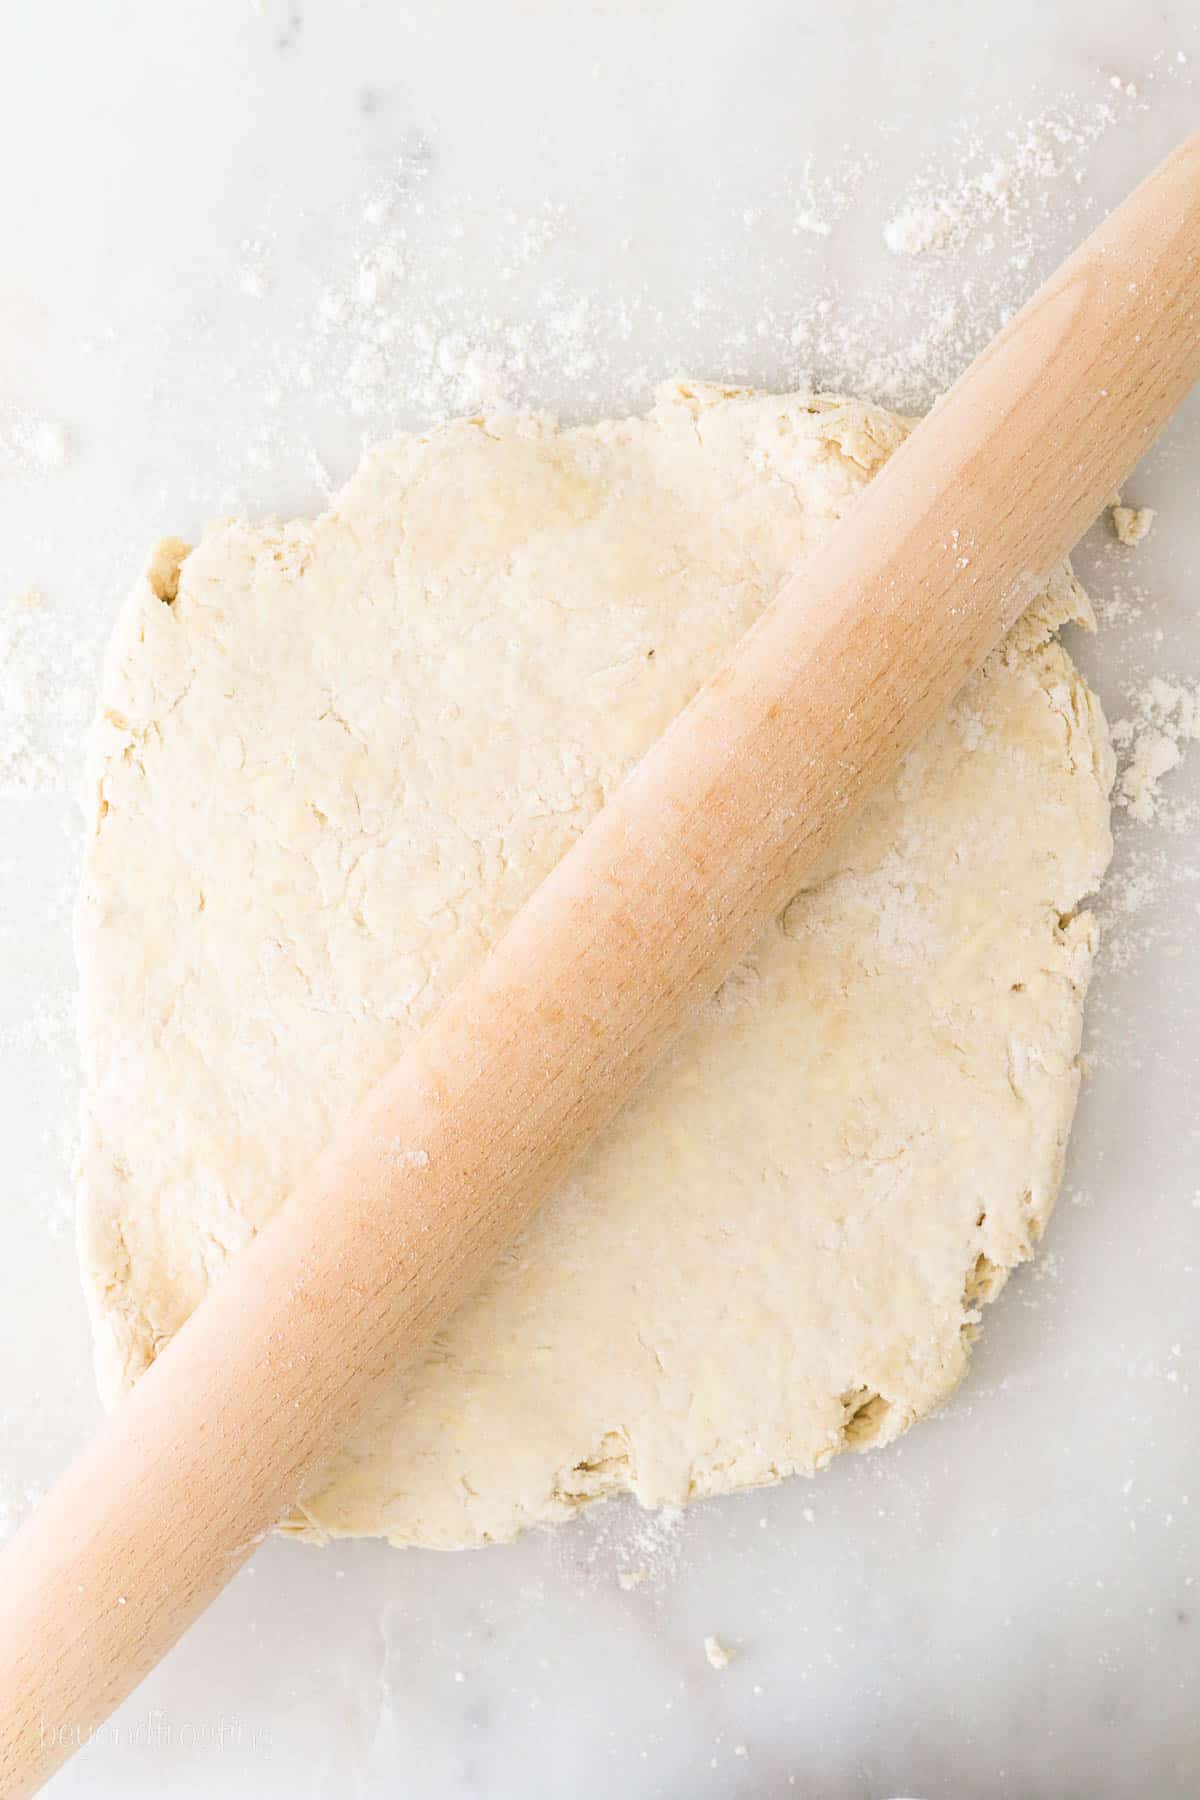 Buttermilk Biscuit dough rolled out with wooden rolling pin resting on top of the dough.